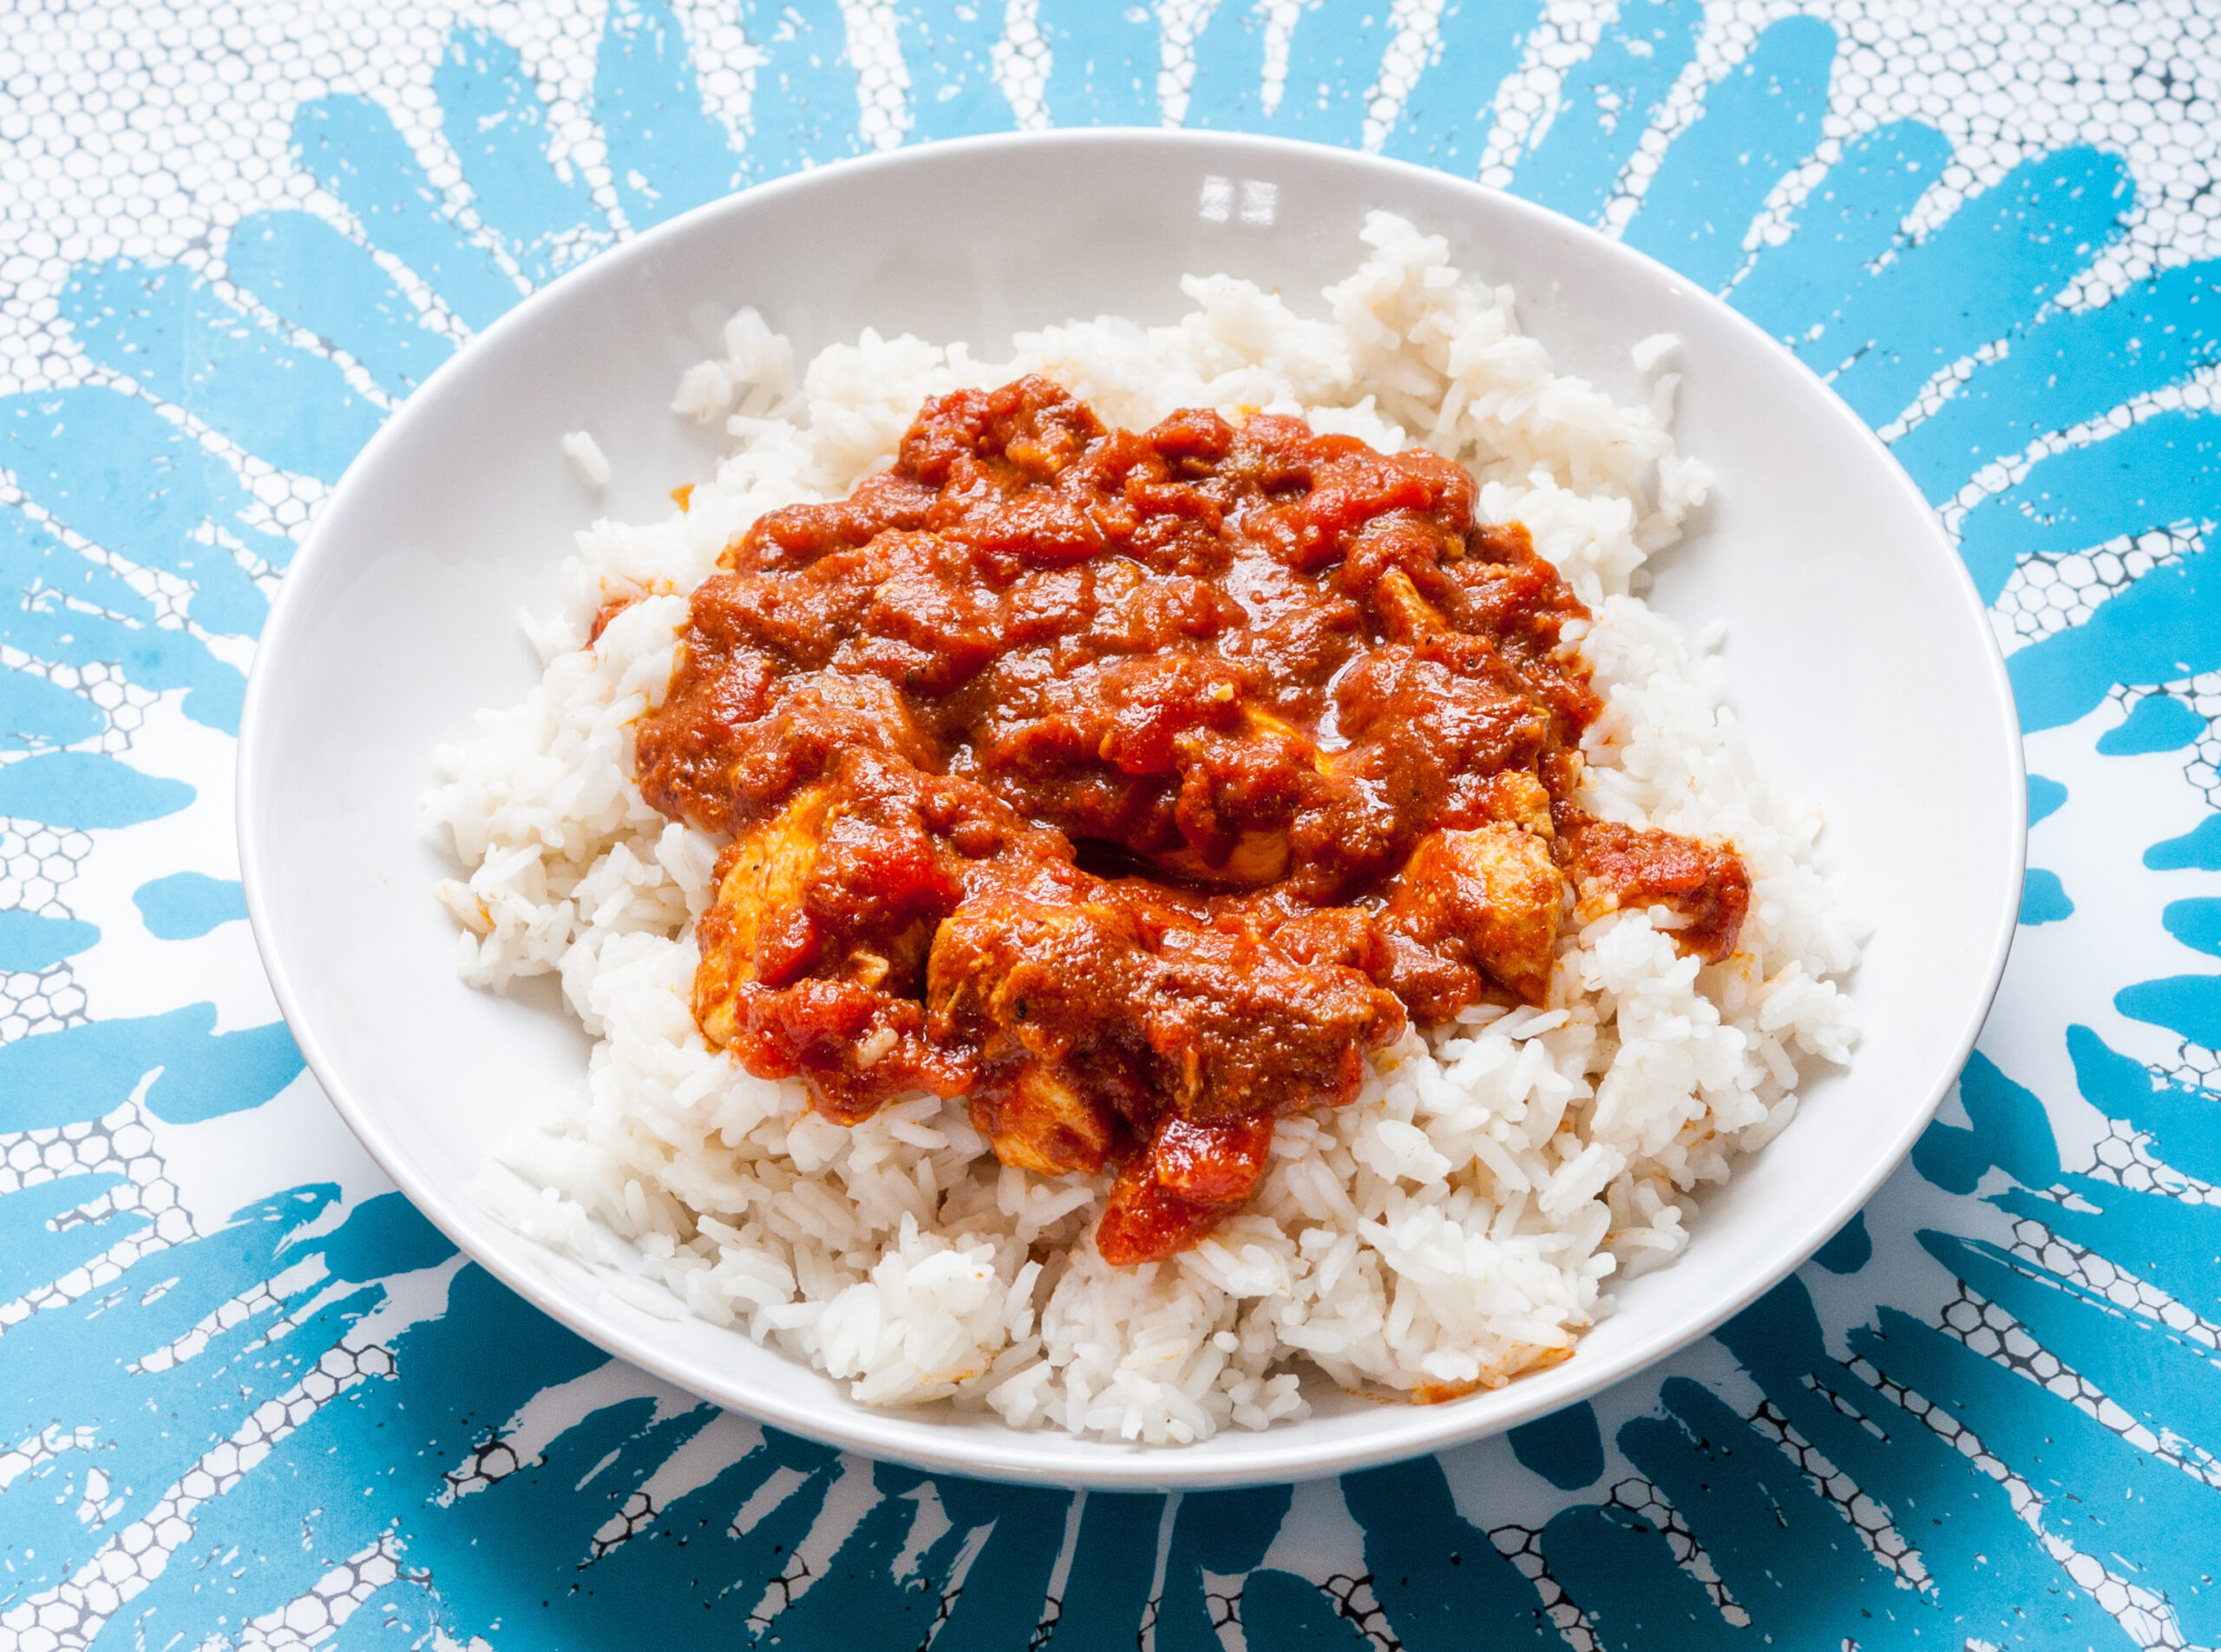 "Bahamian Corned Beef and White Rice on a blue and white background"